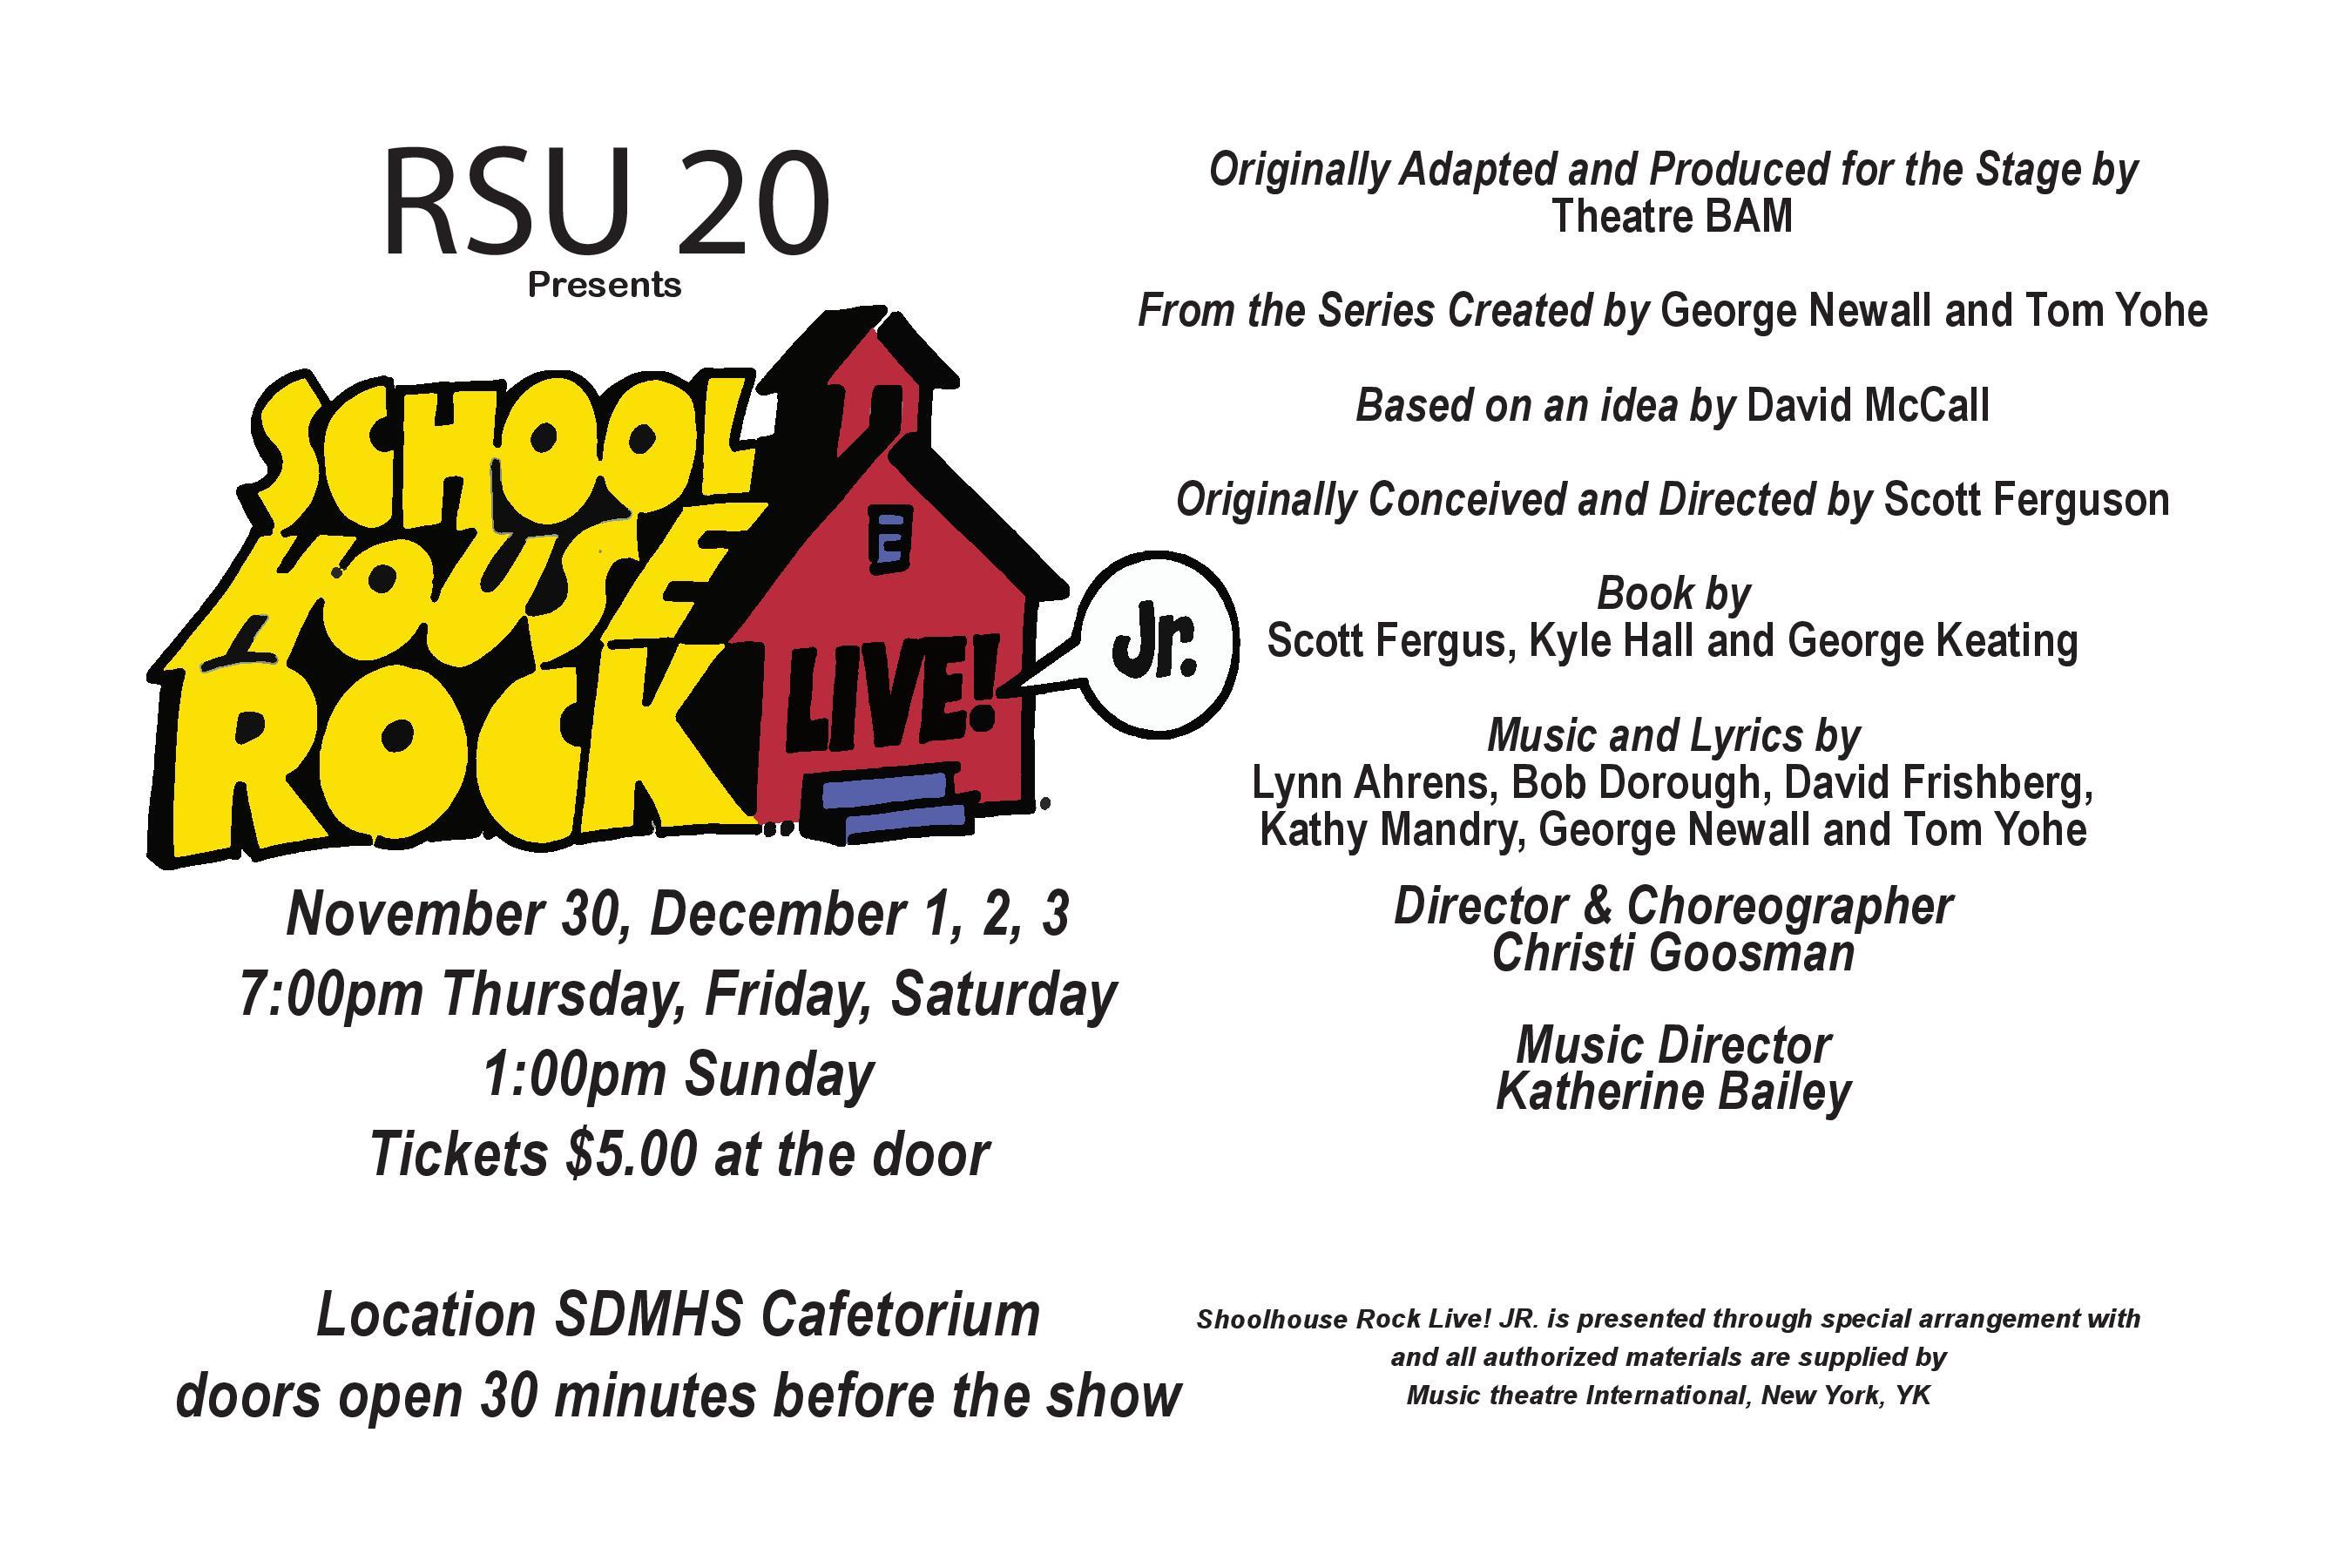 RSU 20 Presents School House Rock Live! Jr. November 30, December 1, 2, 3 2023 7:00pm Thursday, Friday, Saturday  1:00pm Sunday  Tickets $5.00 at the door  Location SDMHS Cafetorium  doors open 30 minutes before the show